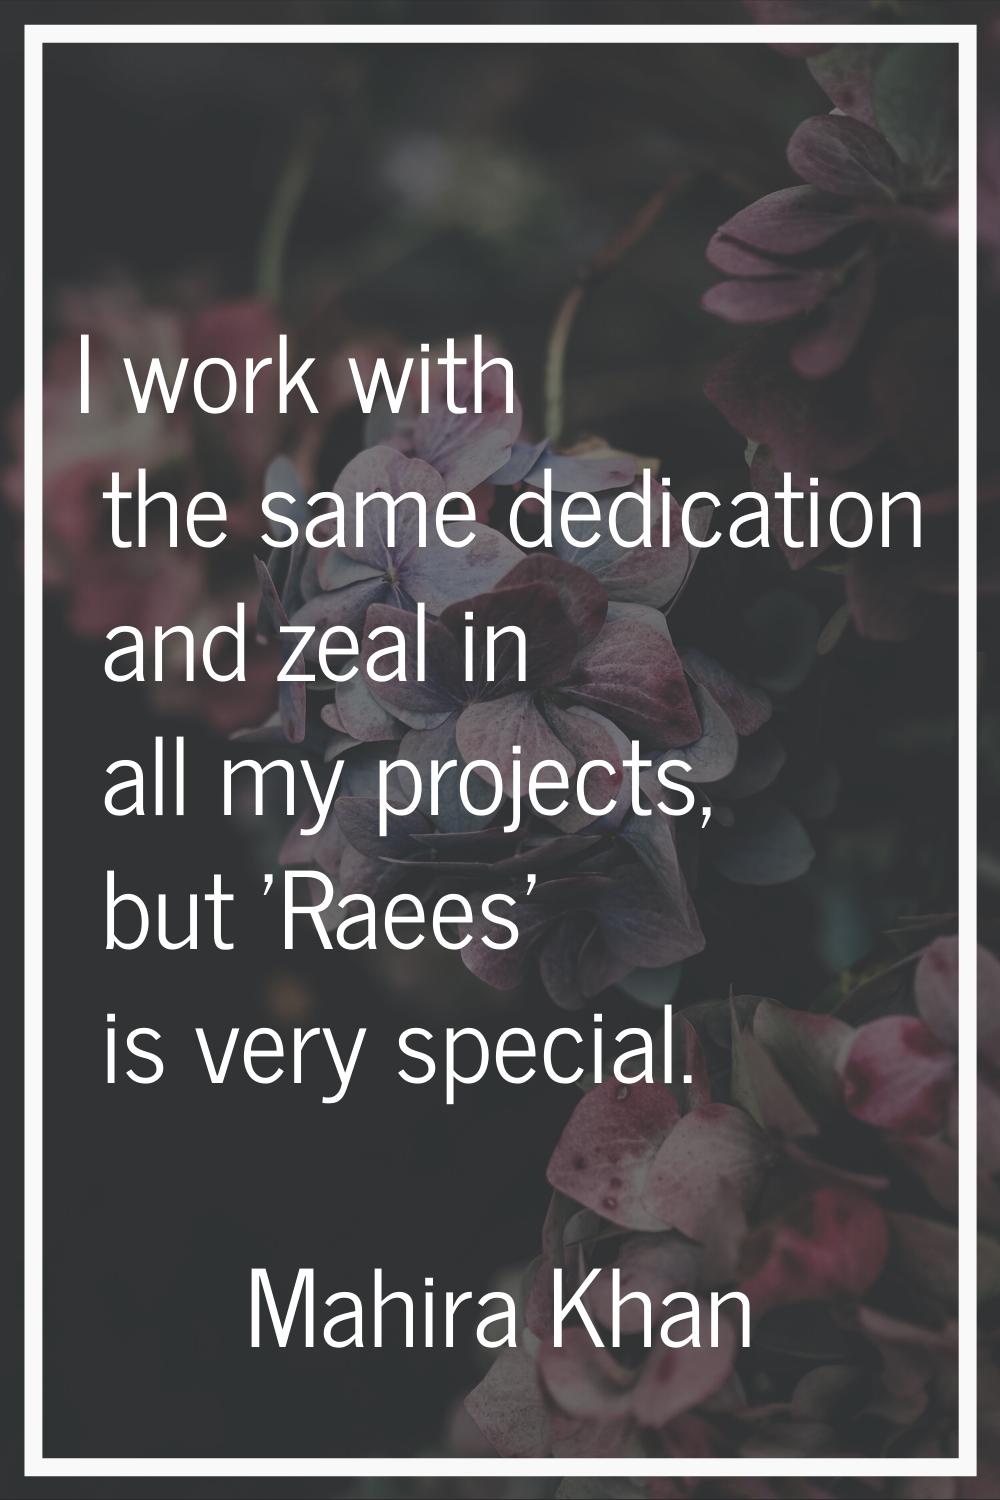 I work with the same dedication and zeal in all my projects, but 'Raees' is very special.